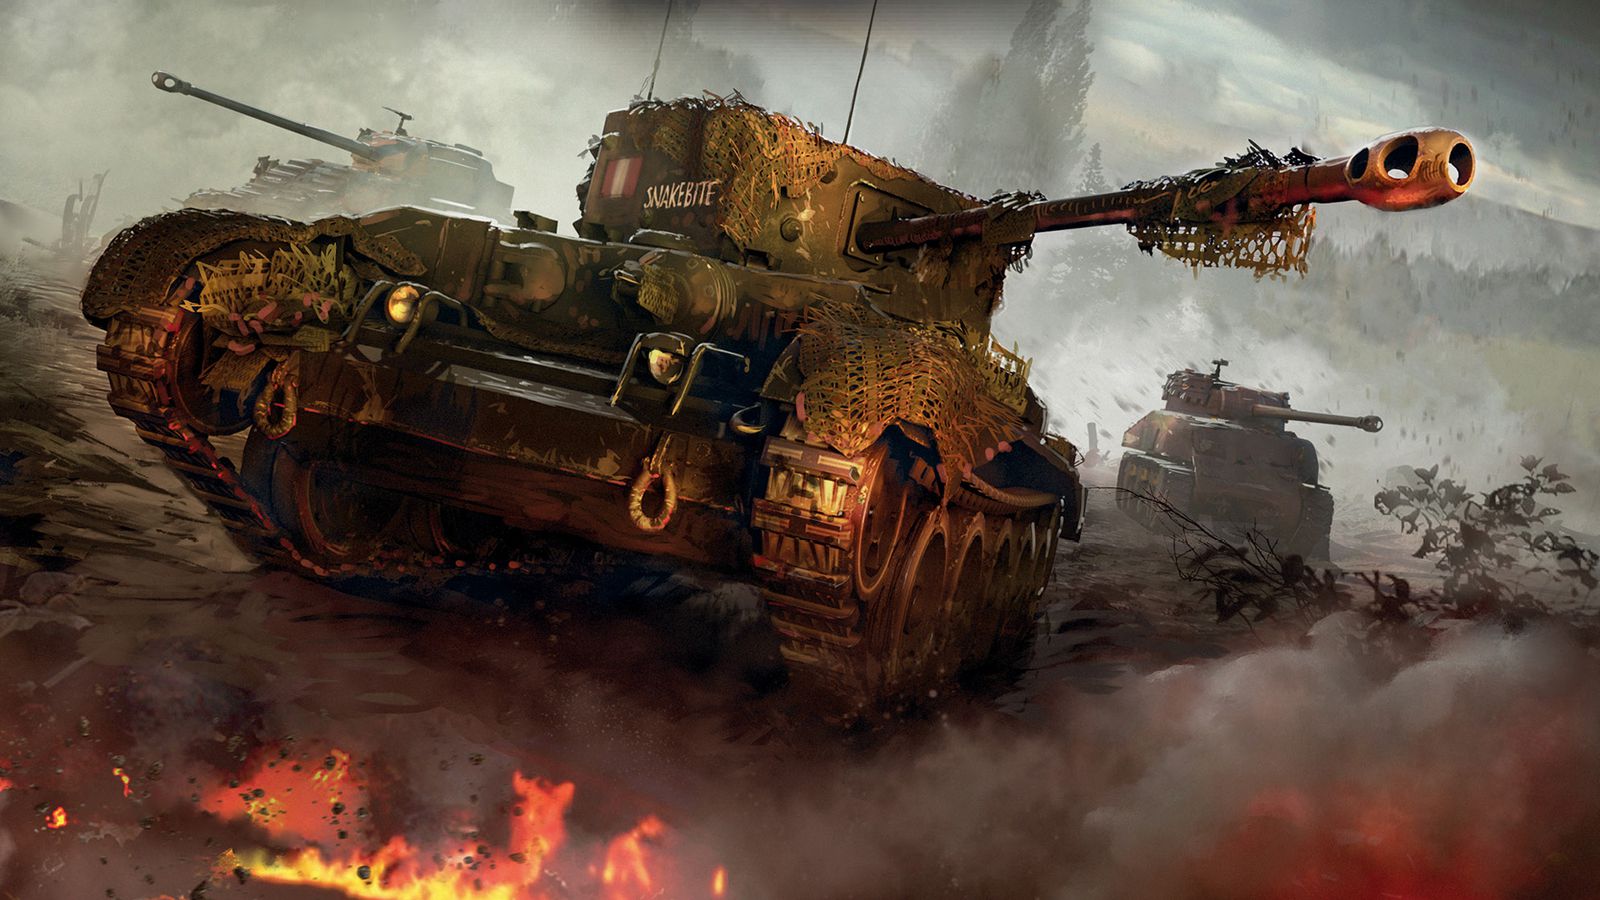 World of Tanks is getting its own comic book, written by Preacher ...